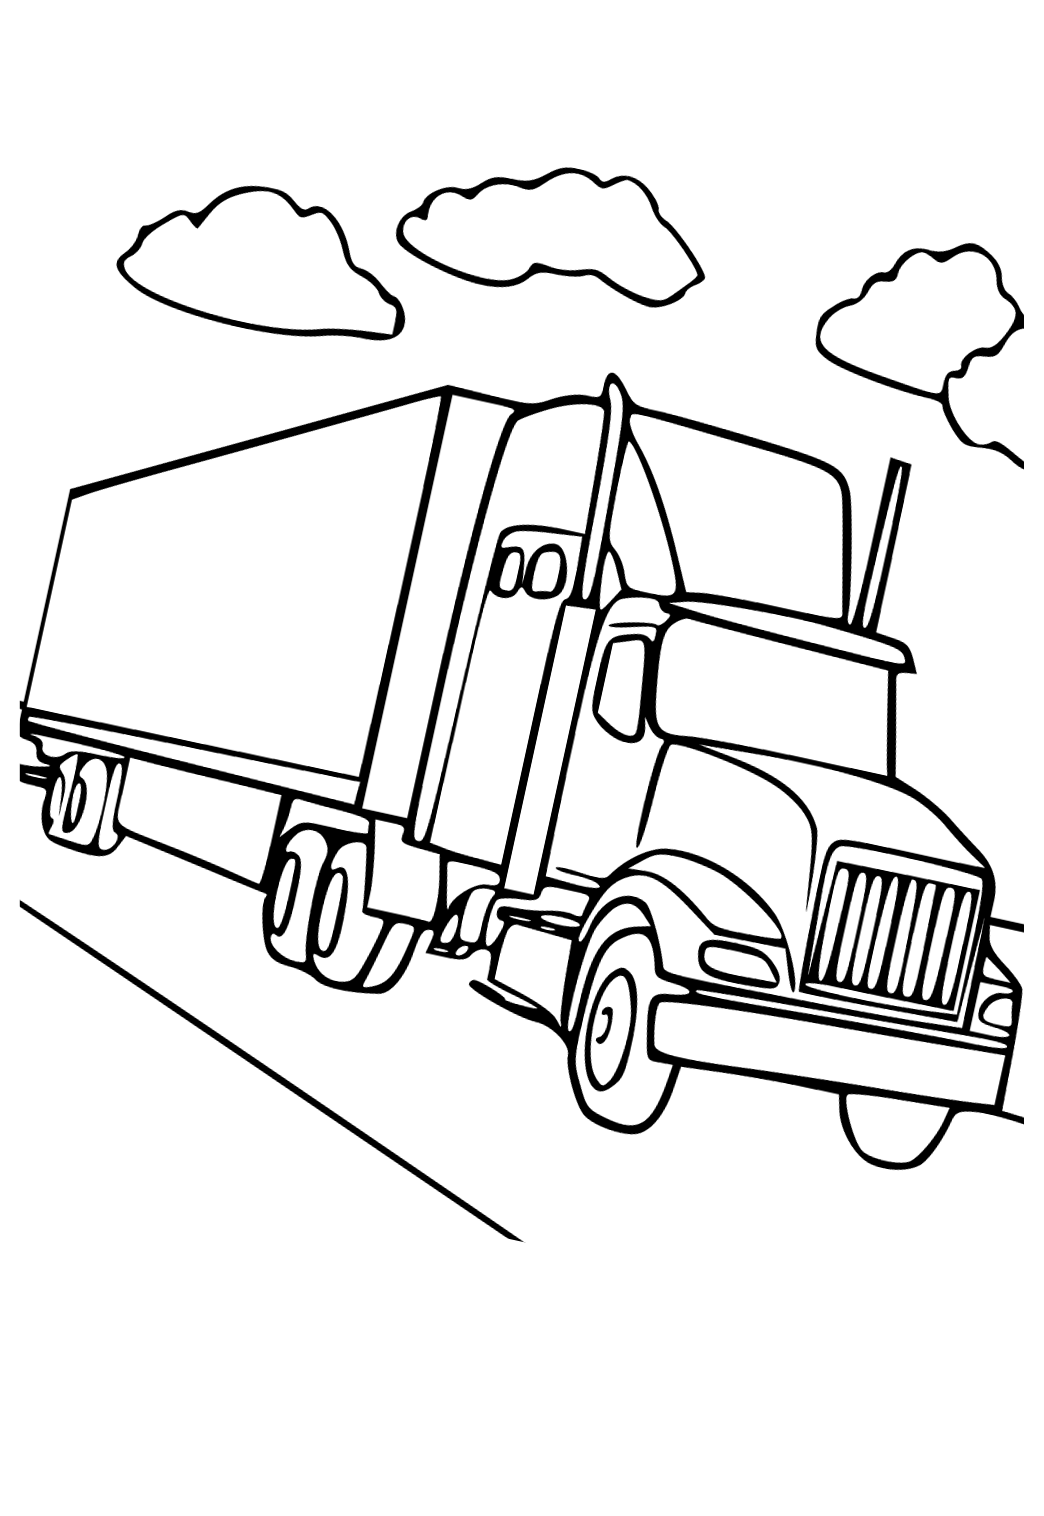 Free printable semi truck clouds coloring page for adults and kids